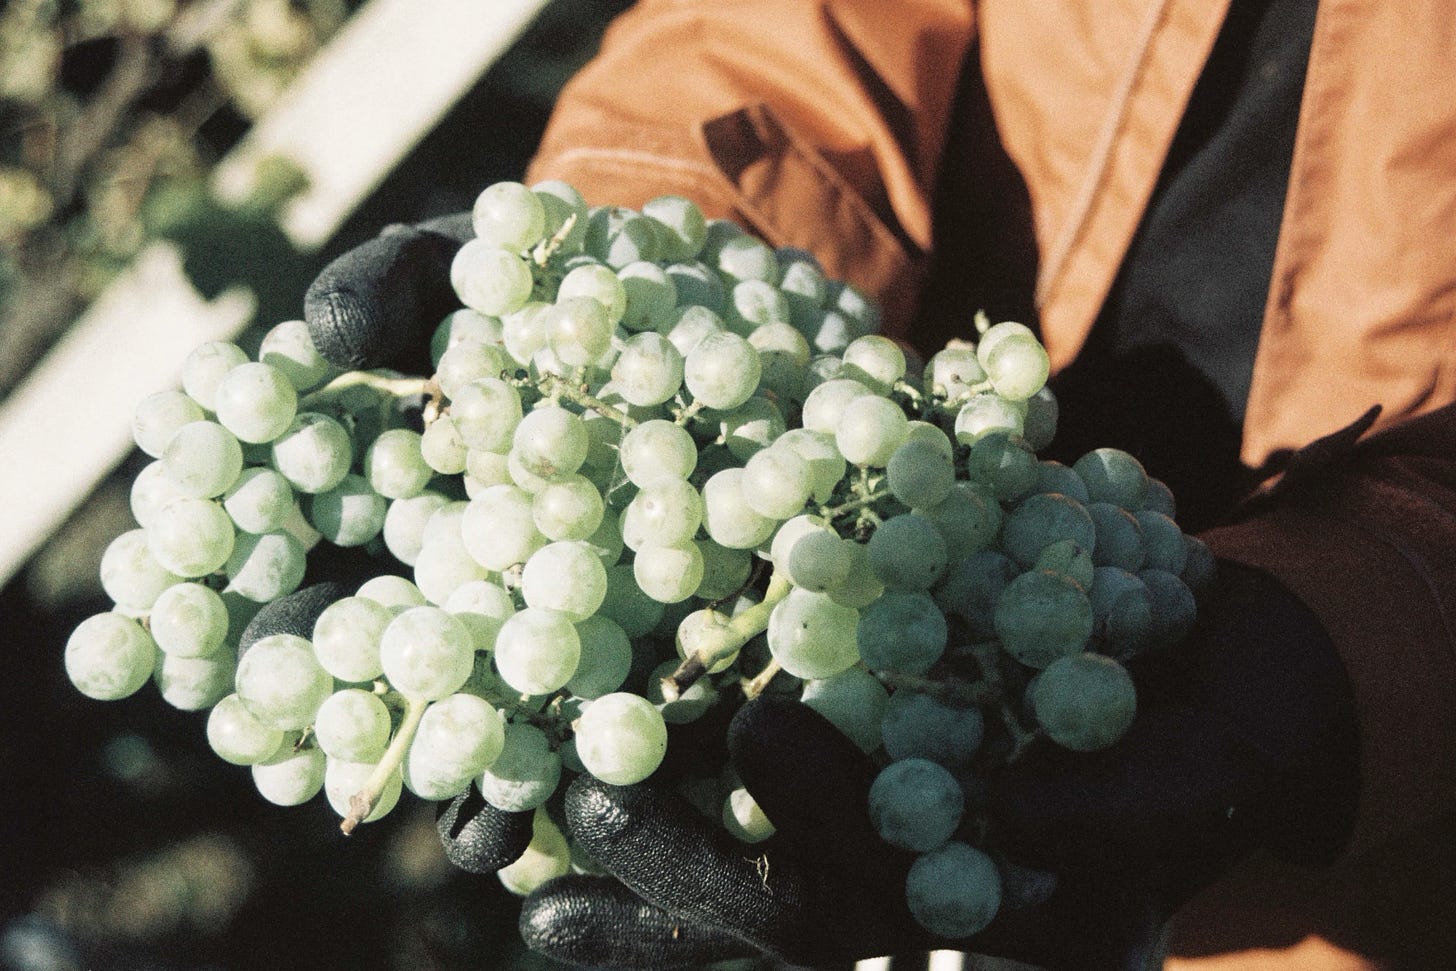 A man holding freshly picked grapes, with a focus on the fruit.